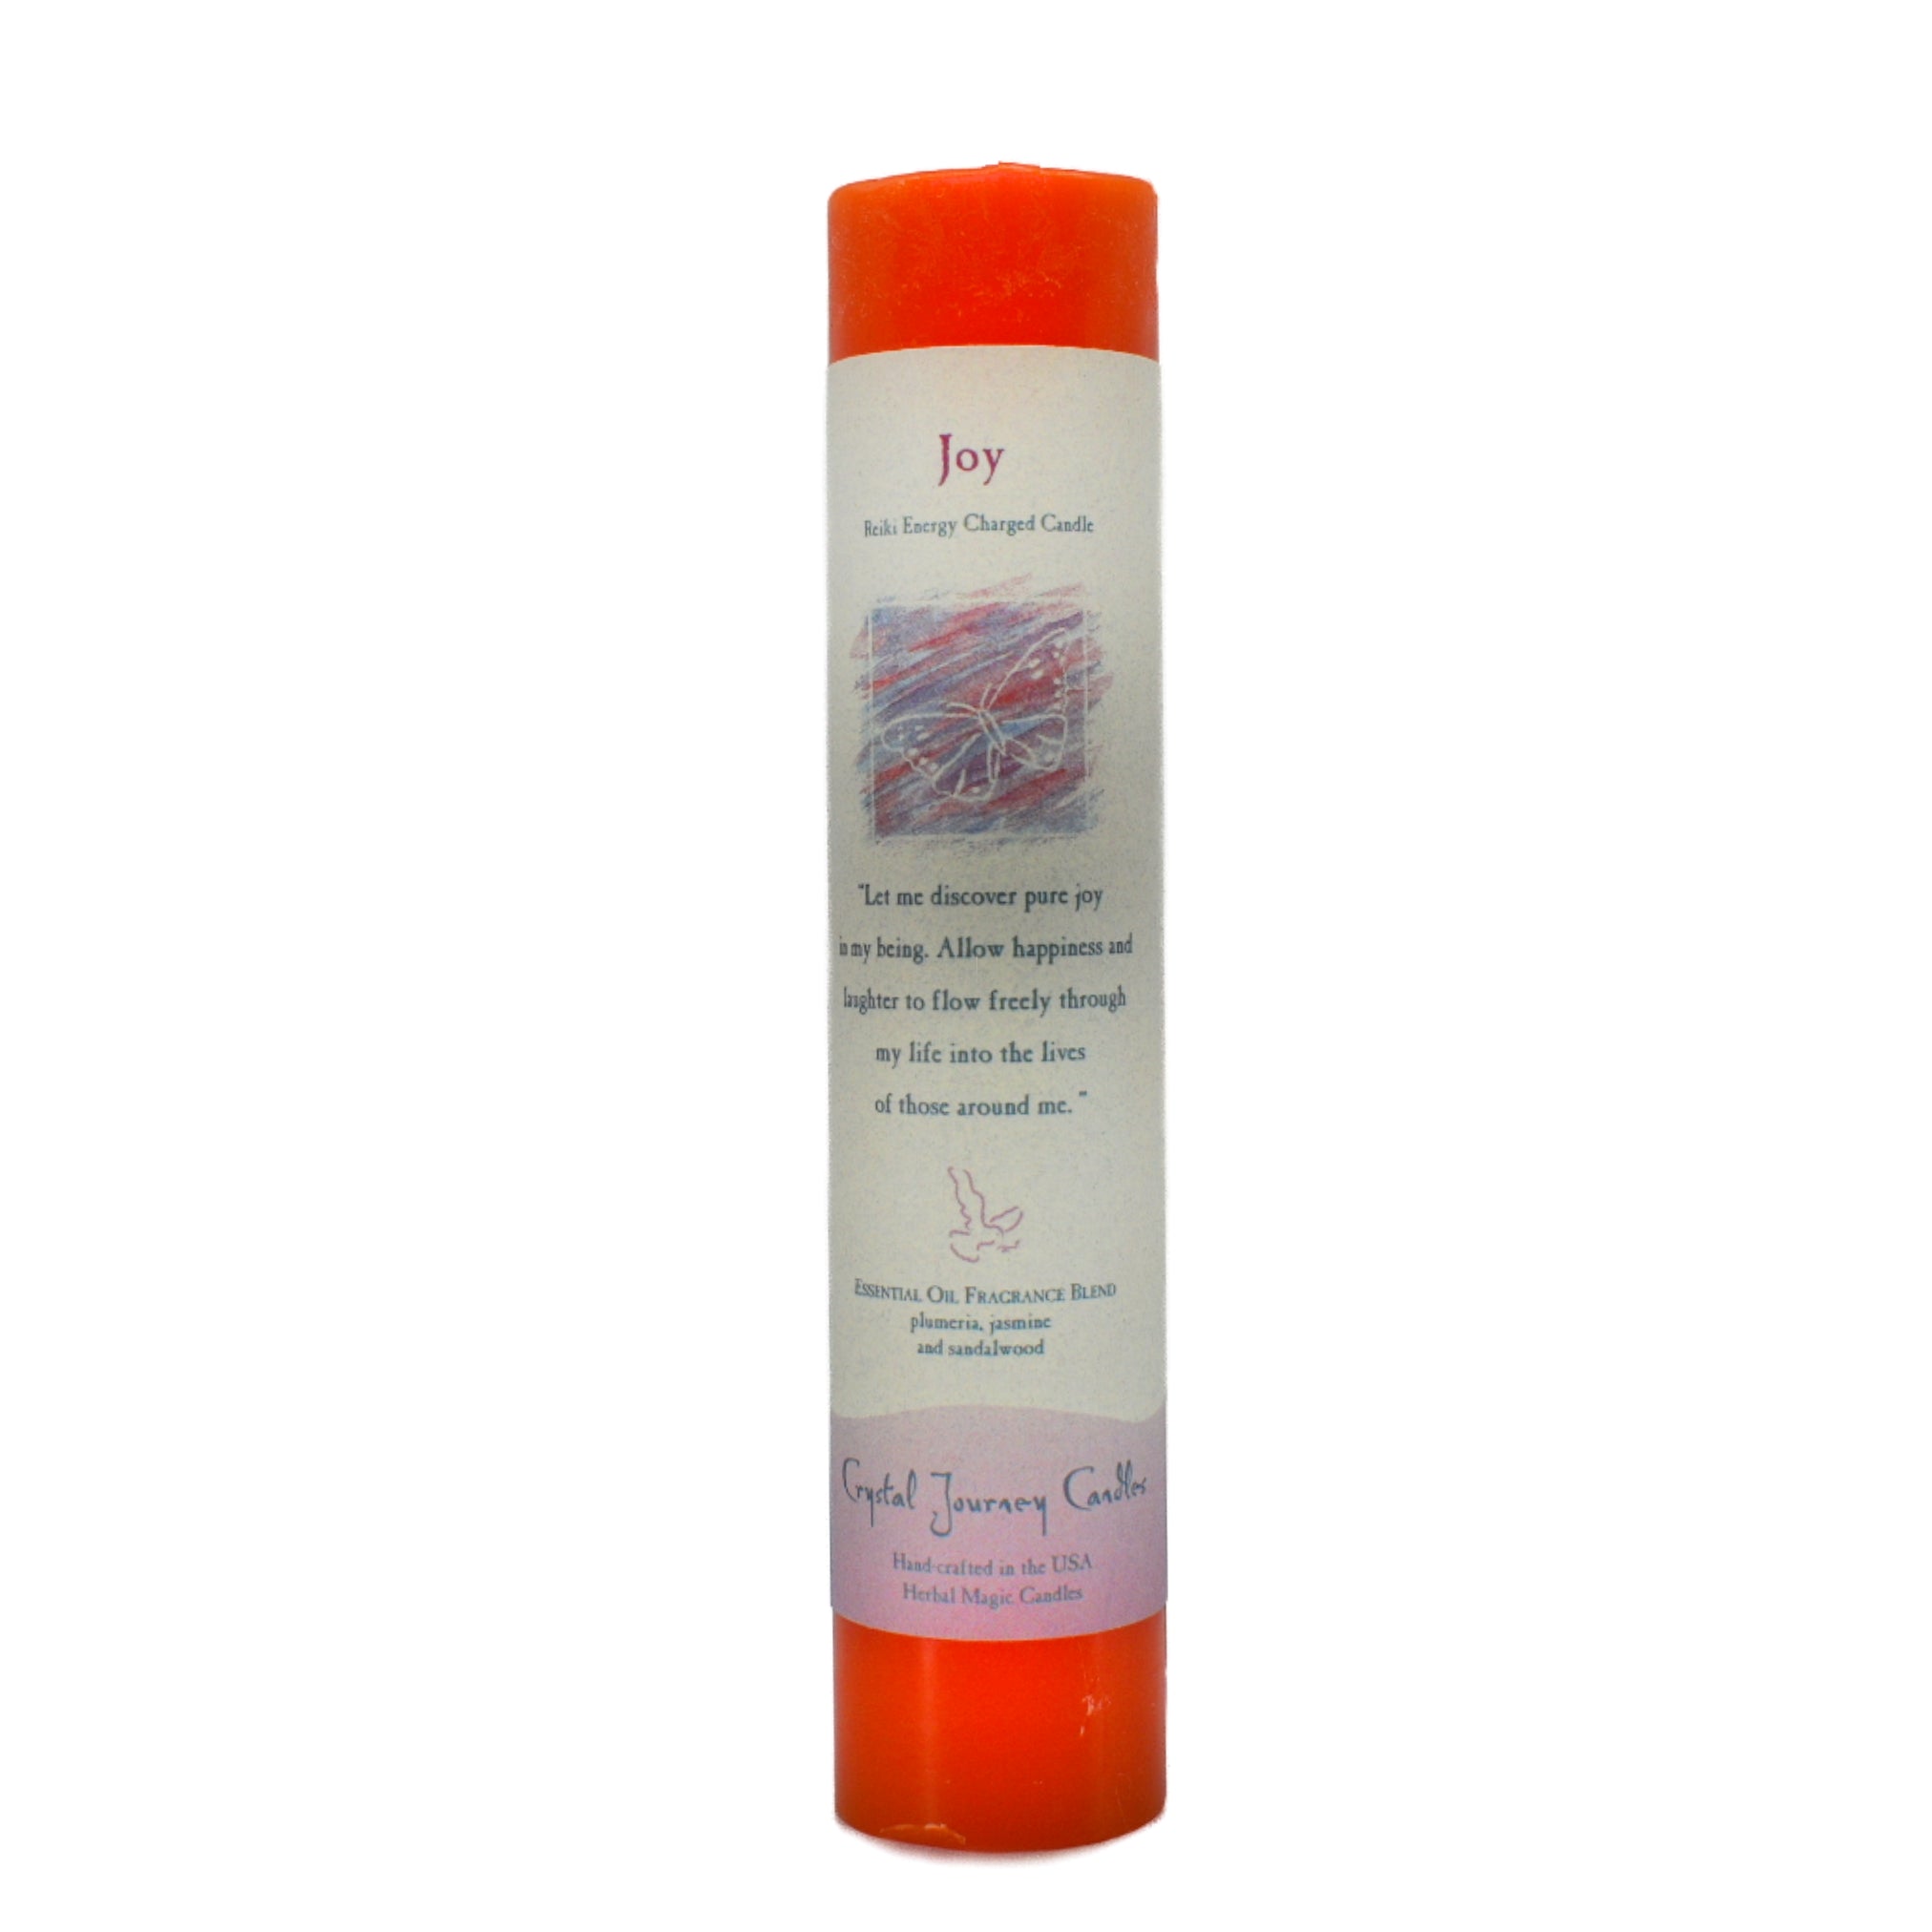 Joy Pillar Candle.  This candle is used to create a home filled with love and caring.  Scented with essential oils of plumeria, jasmine and sandalwood.  The color of the candle is orange.